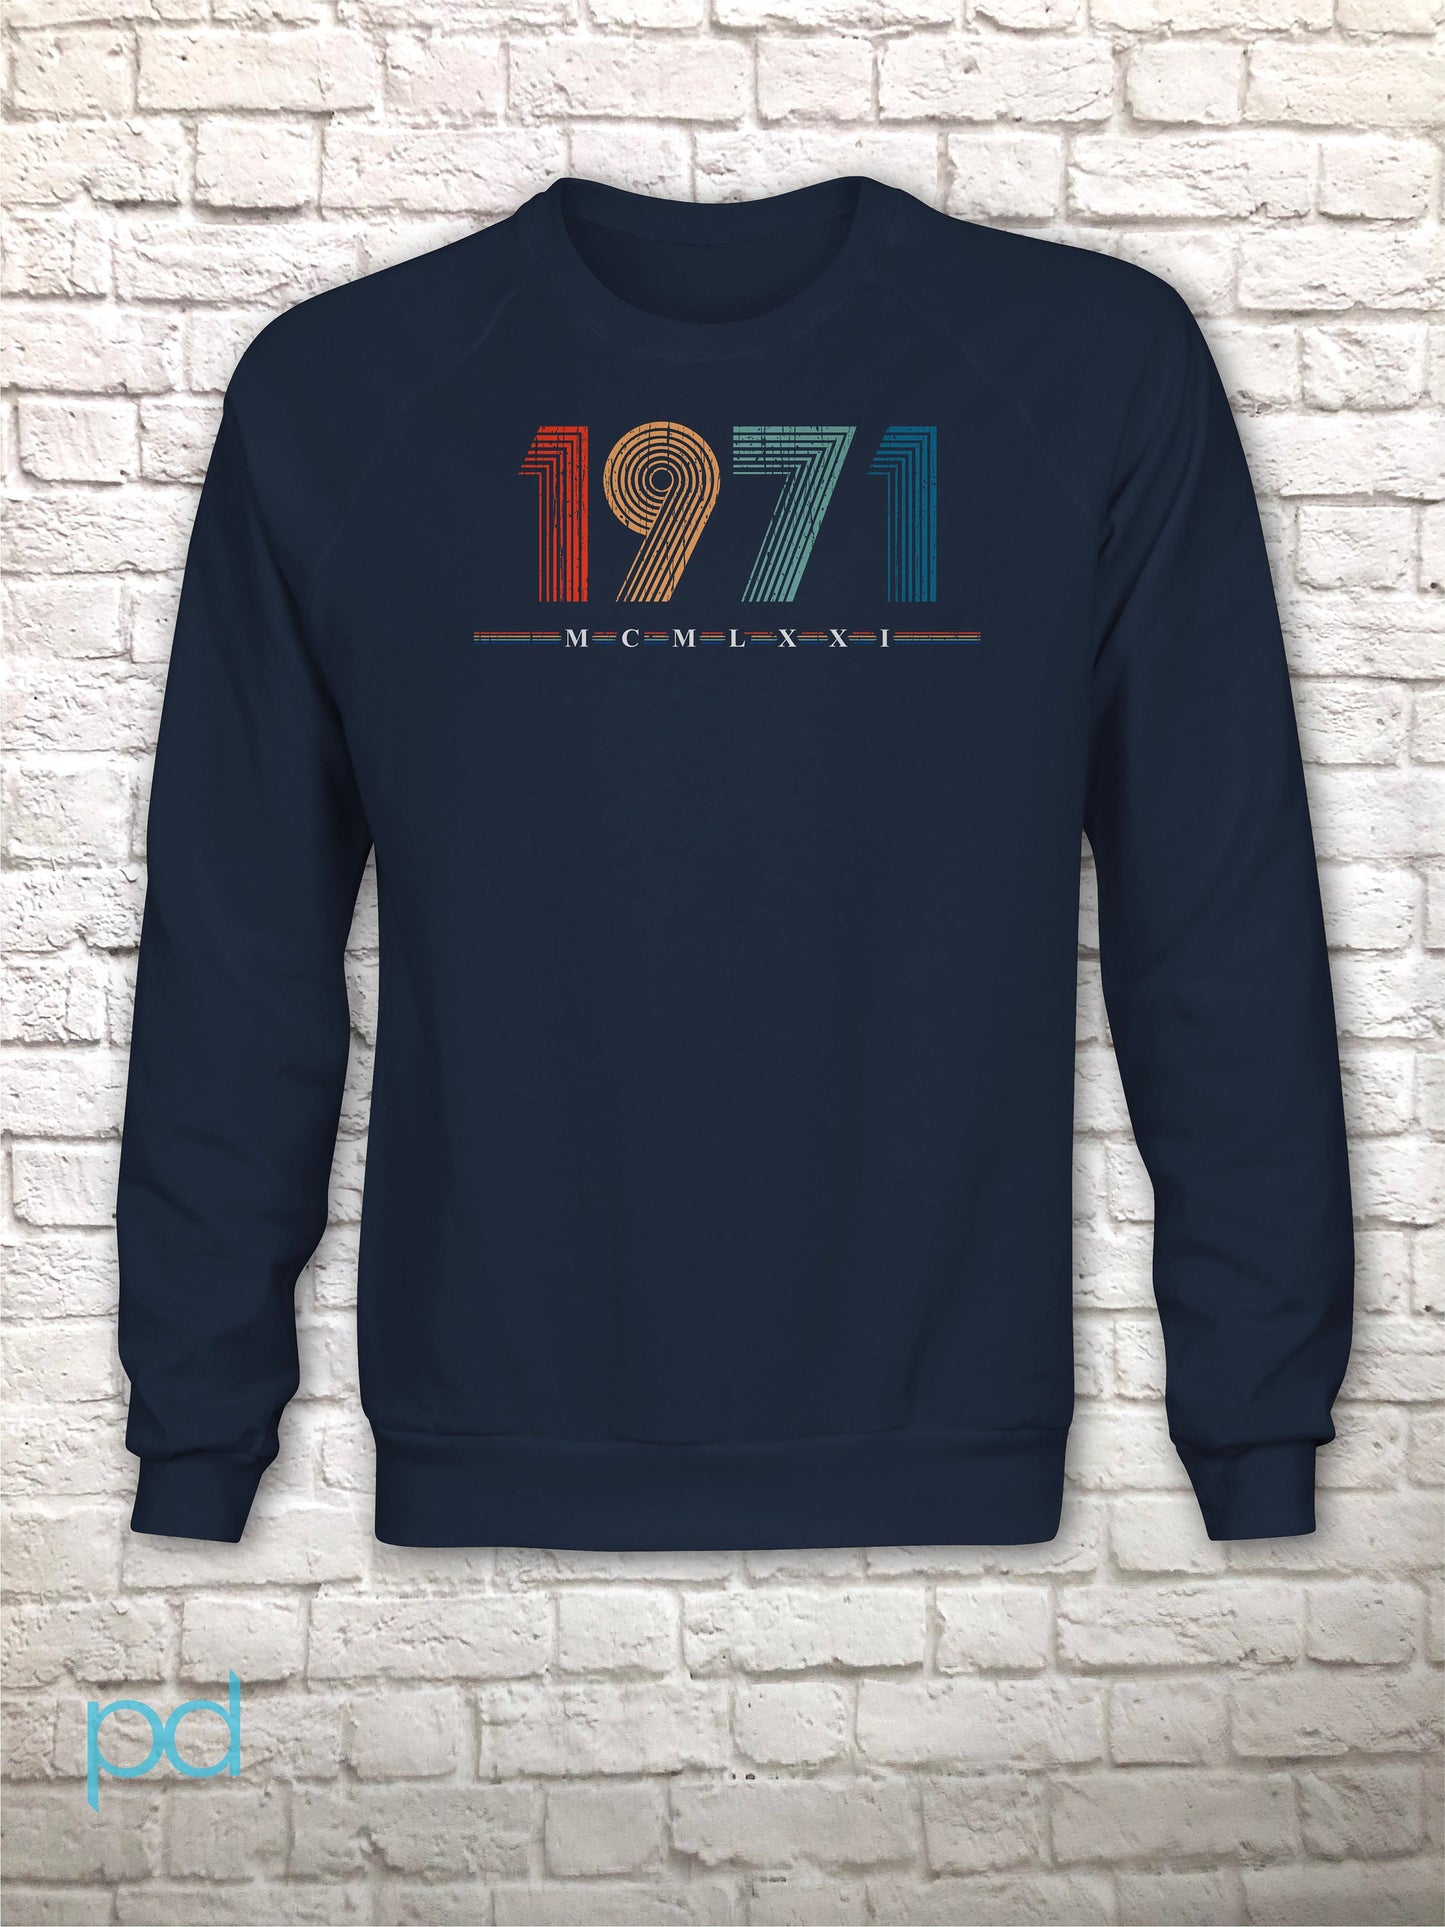 1971 Longsleeve Sweatshirt, 51st Birthday Gift Sweater in Retro & Vintage 70s style, MCMLXXI Fiftieth Bday Jumper Top For Men or Women